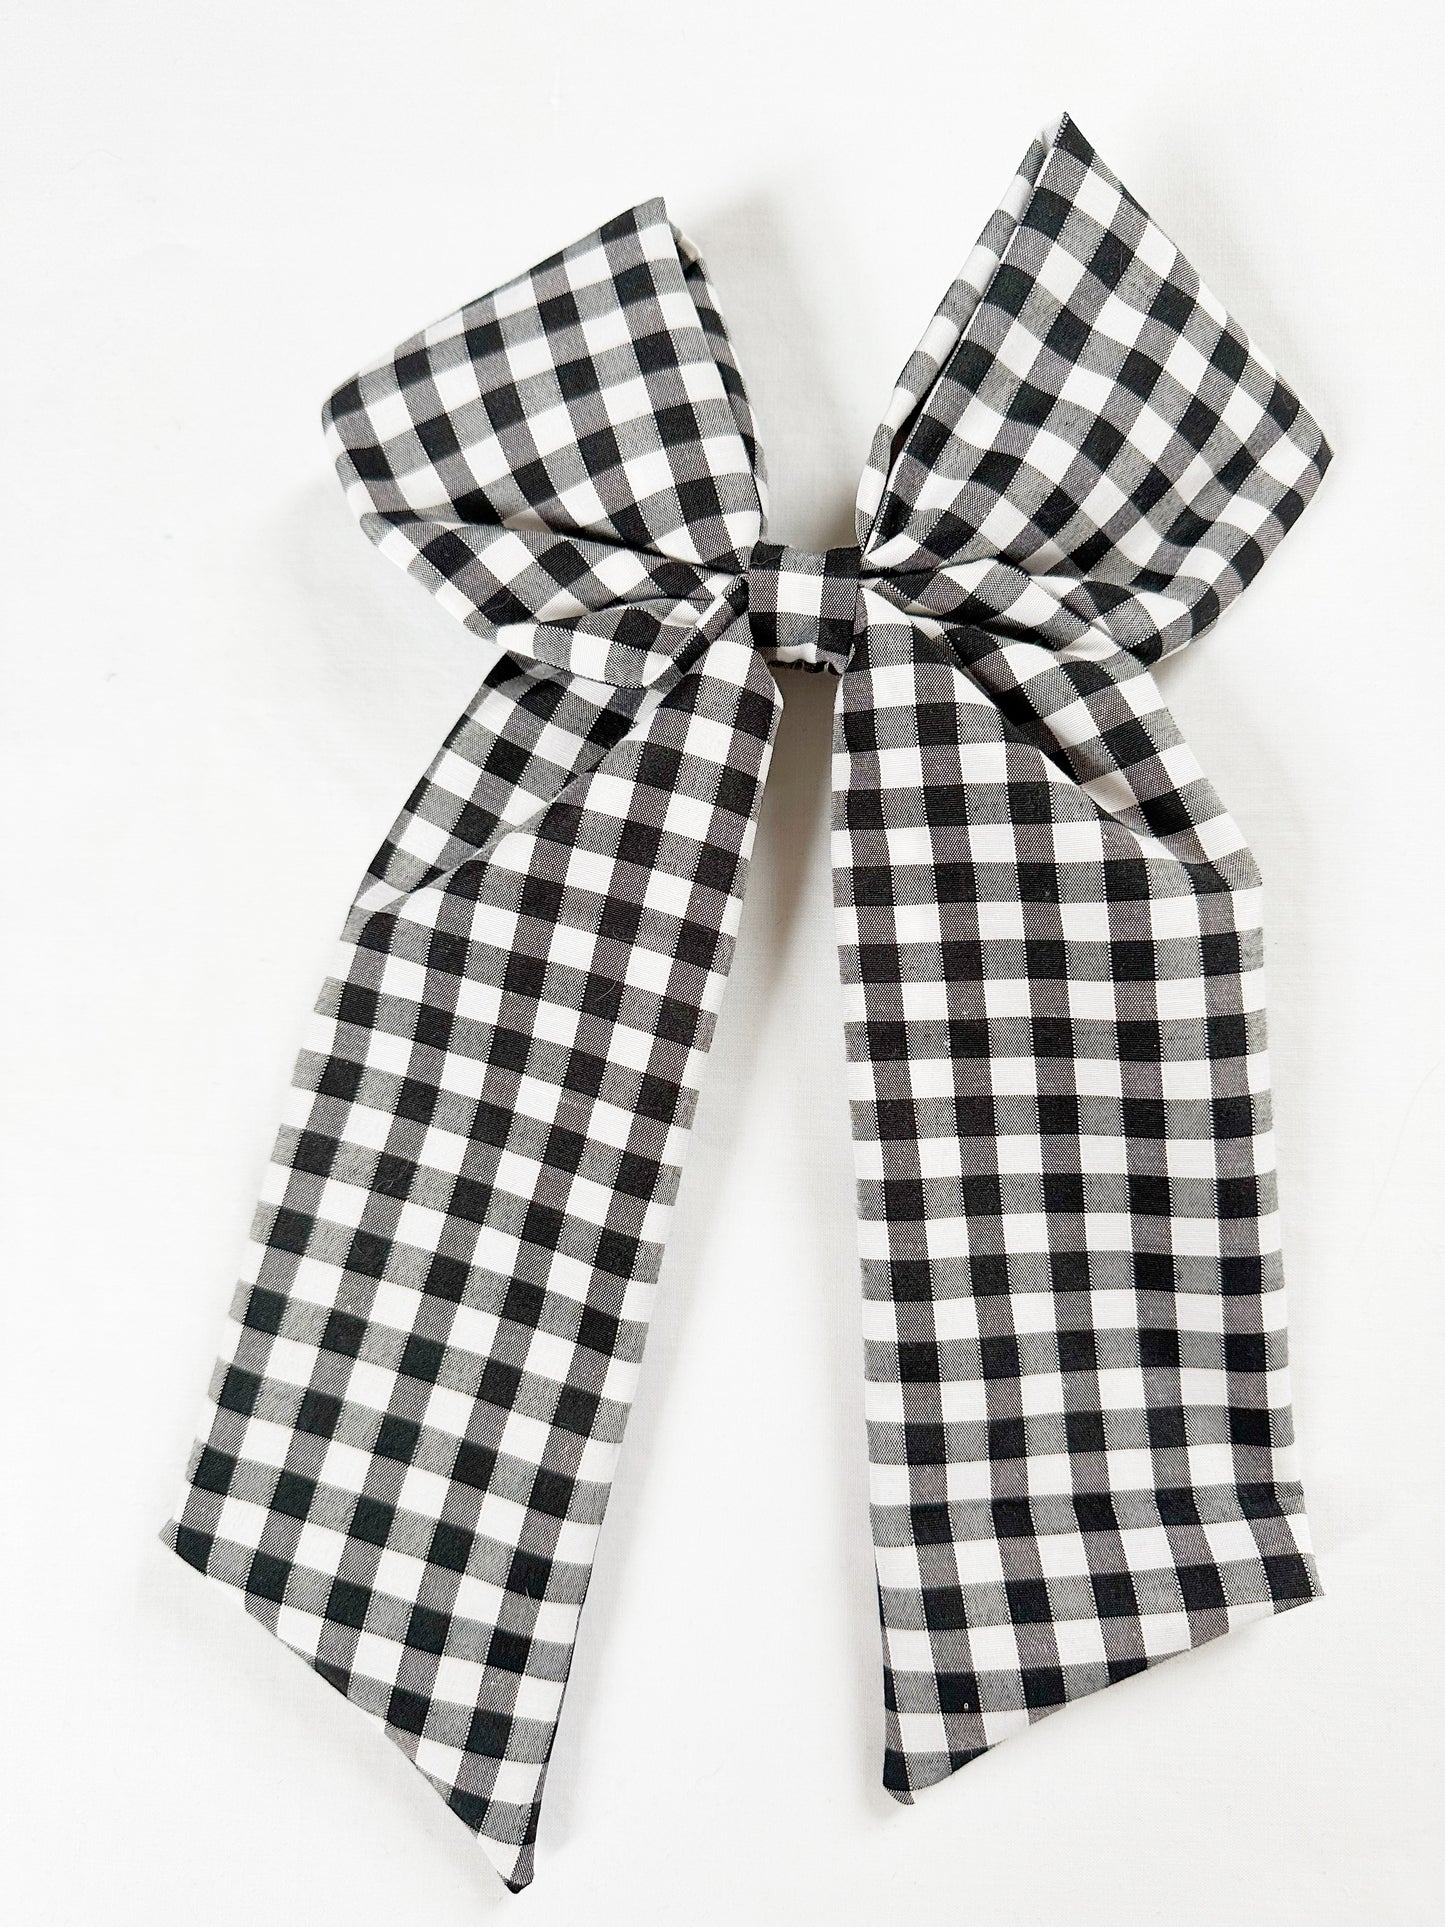 POWER Hair Bow in black and white gingham